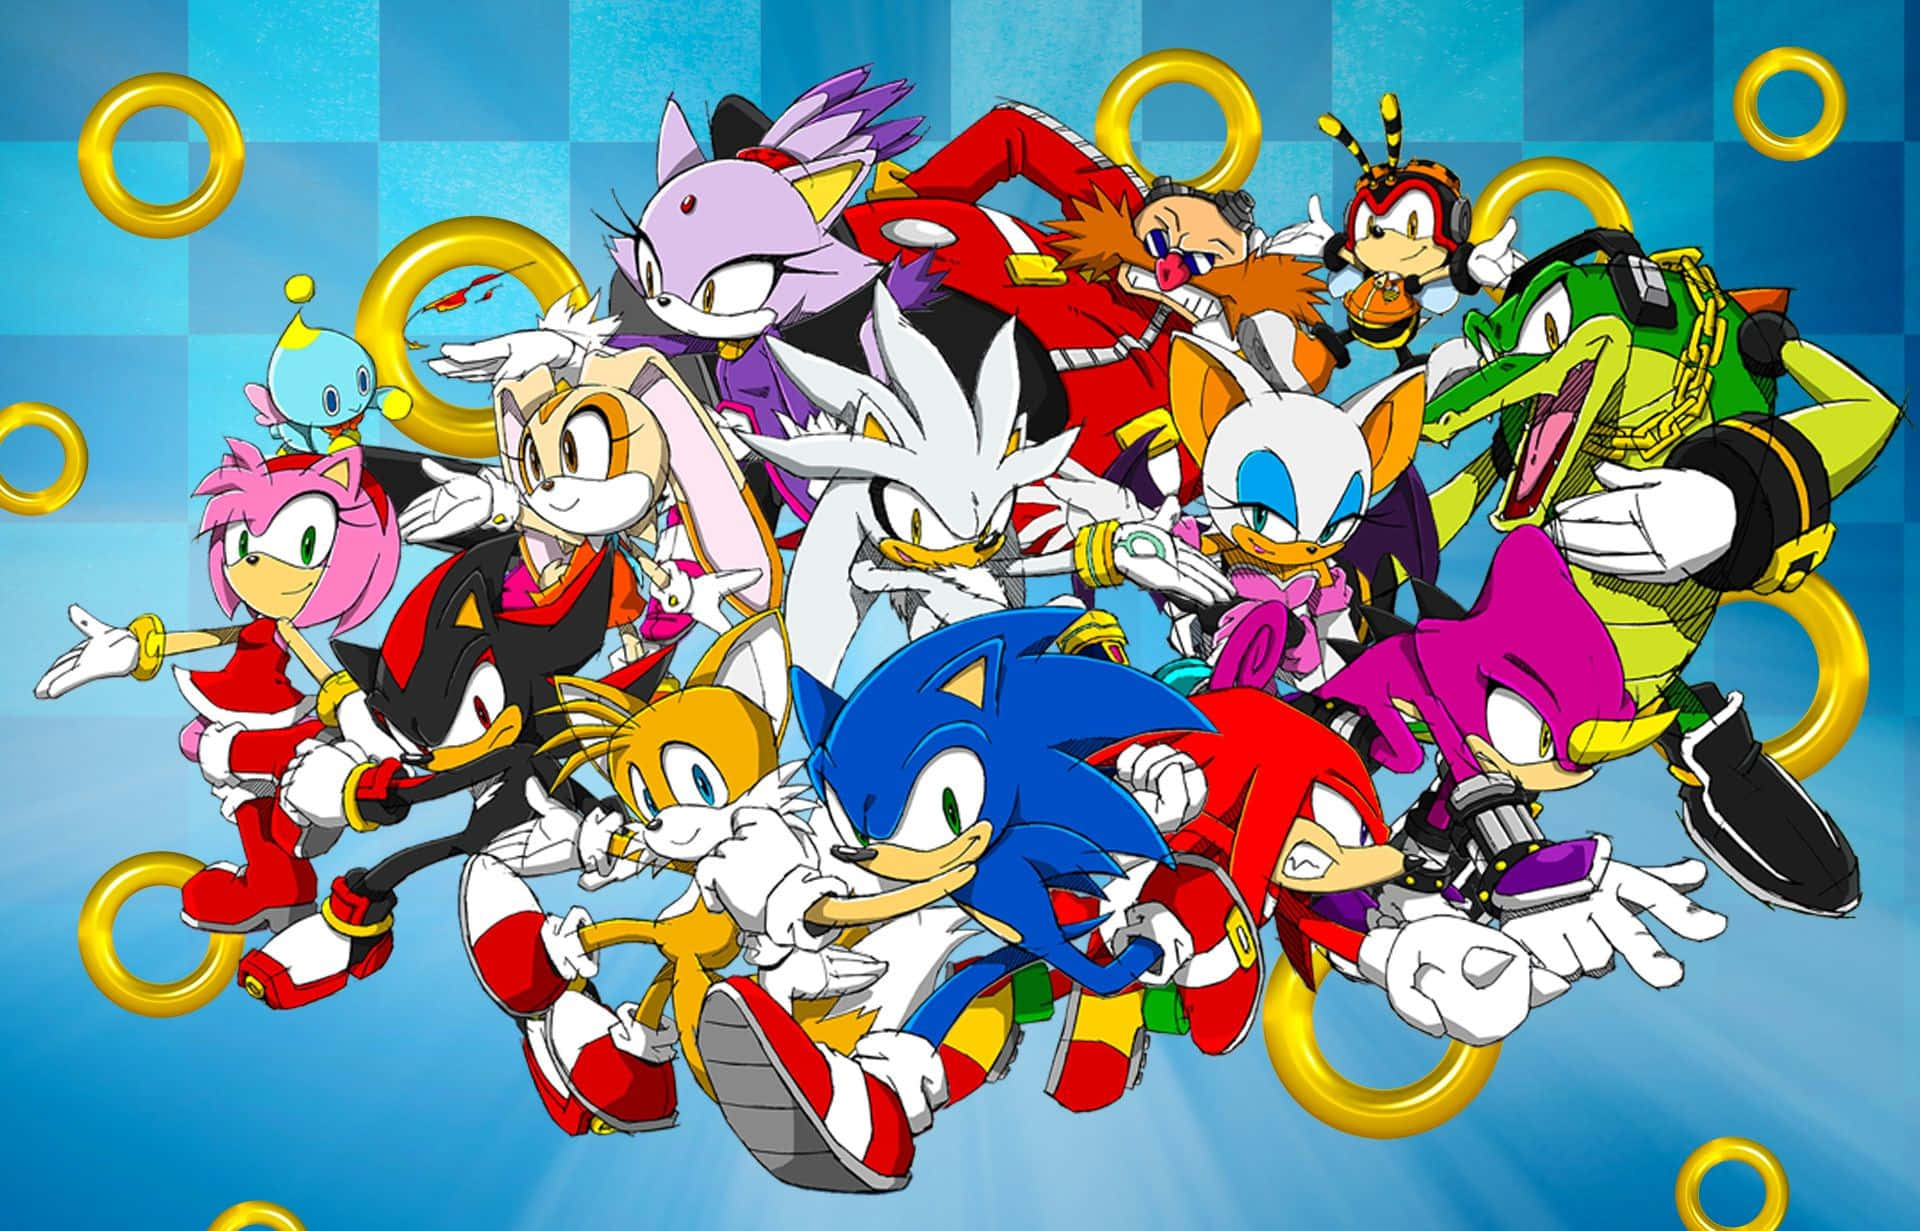 Sonic Characters Unite in Action Wallpaper